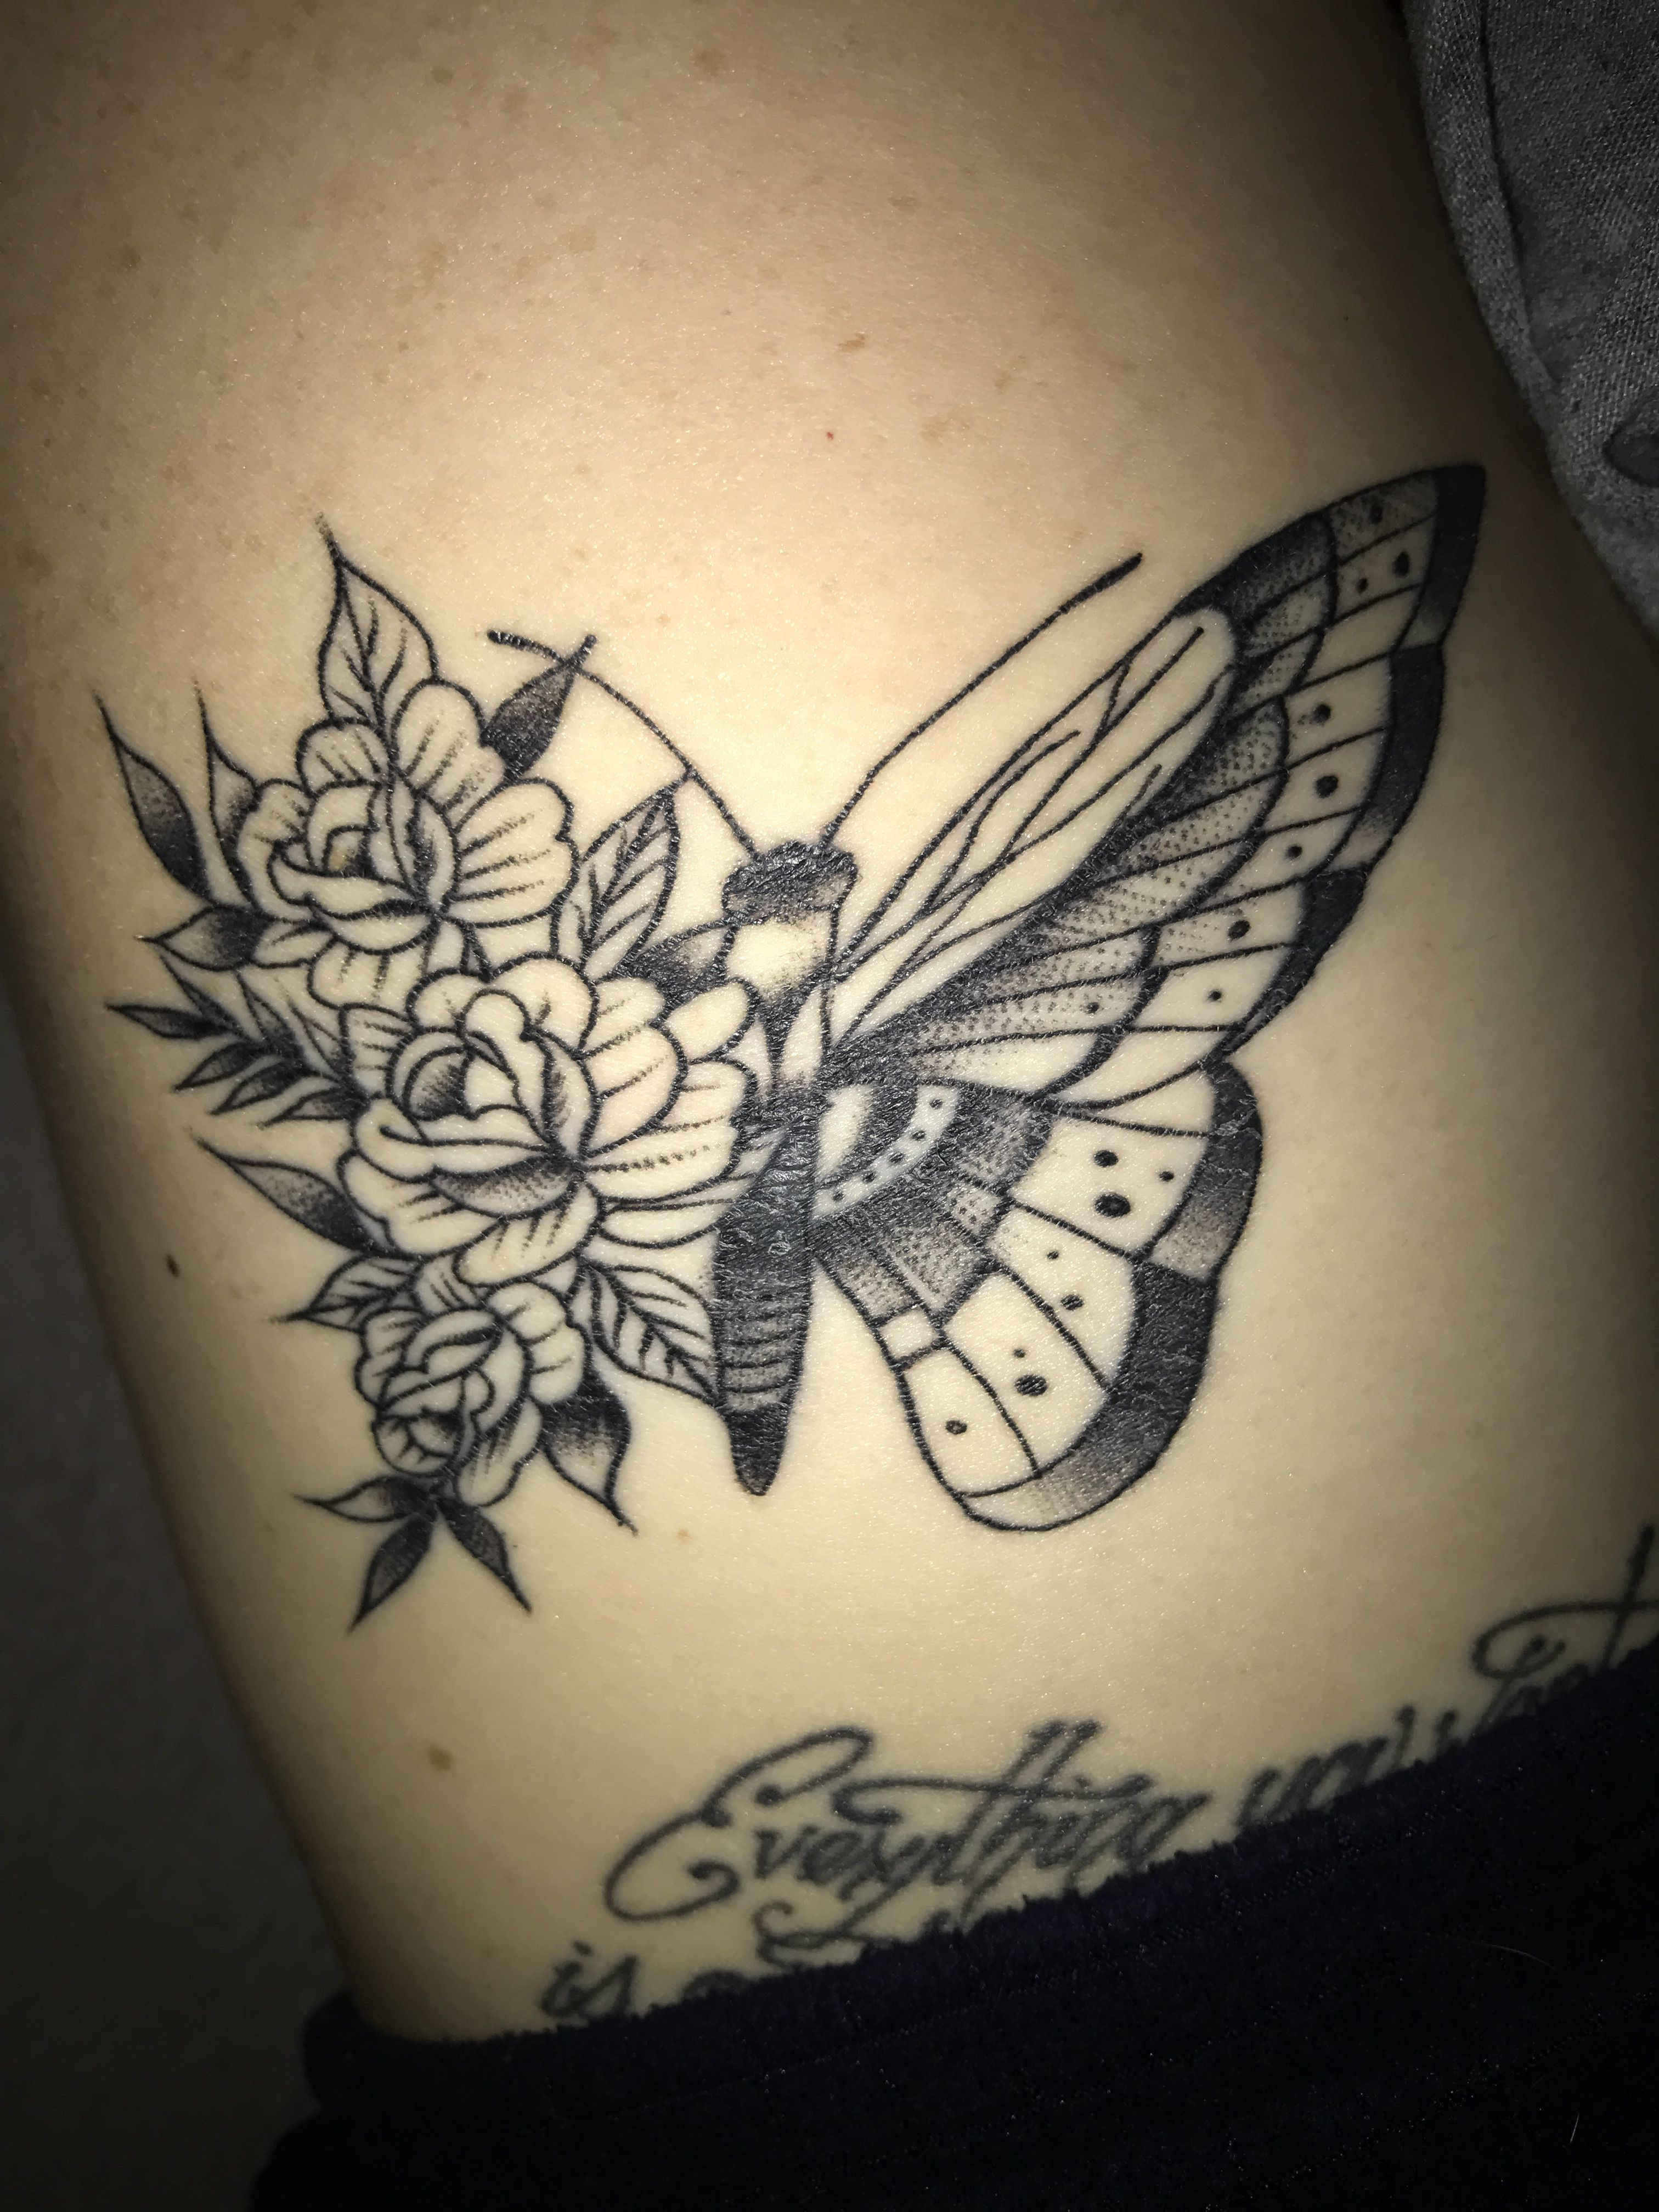 Butterfly Tattoo With Flower Wing Tattoos Tattoos Flowers Drawings inside measurements 3024 X 4032